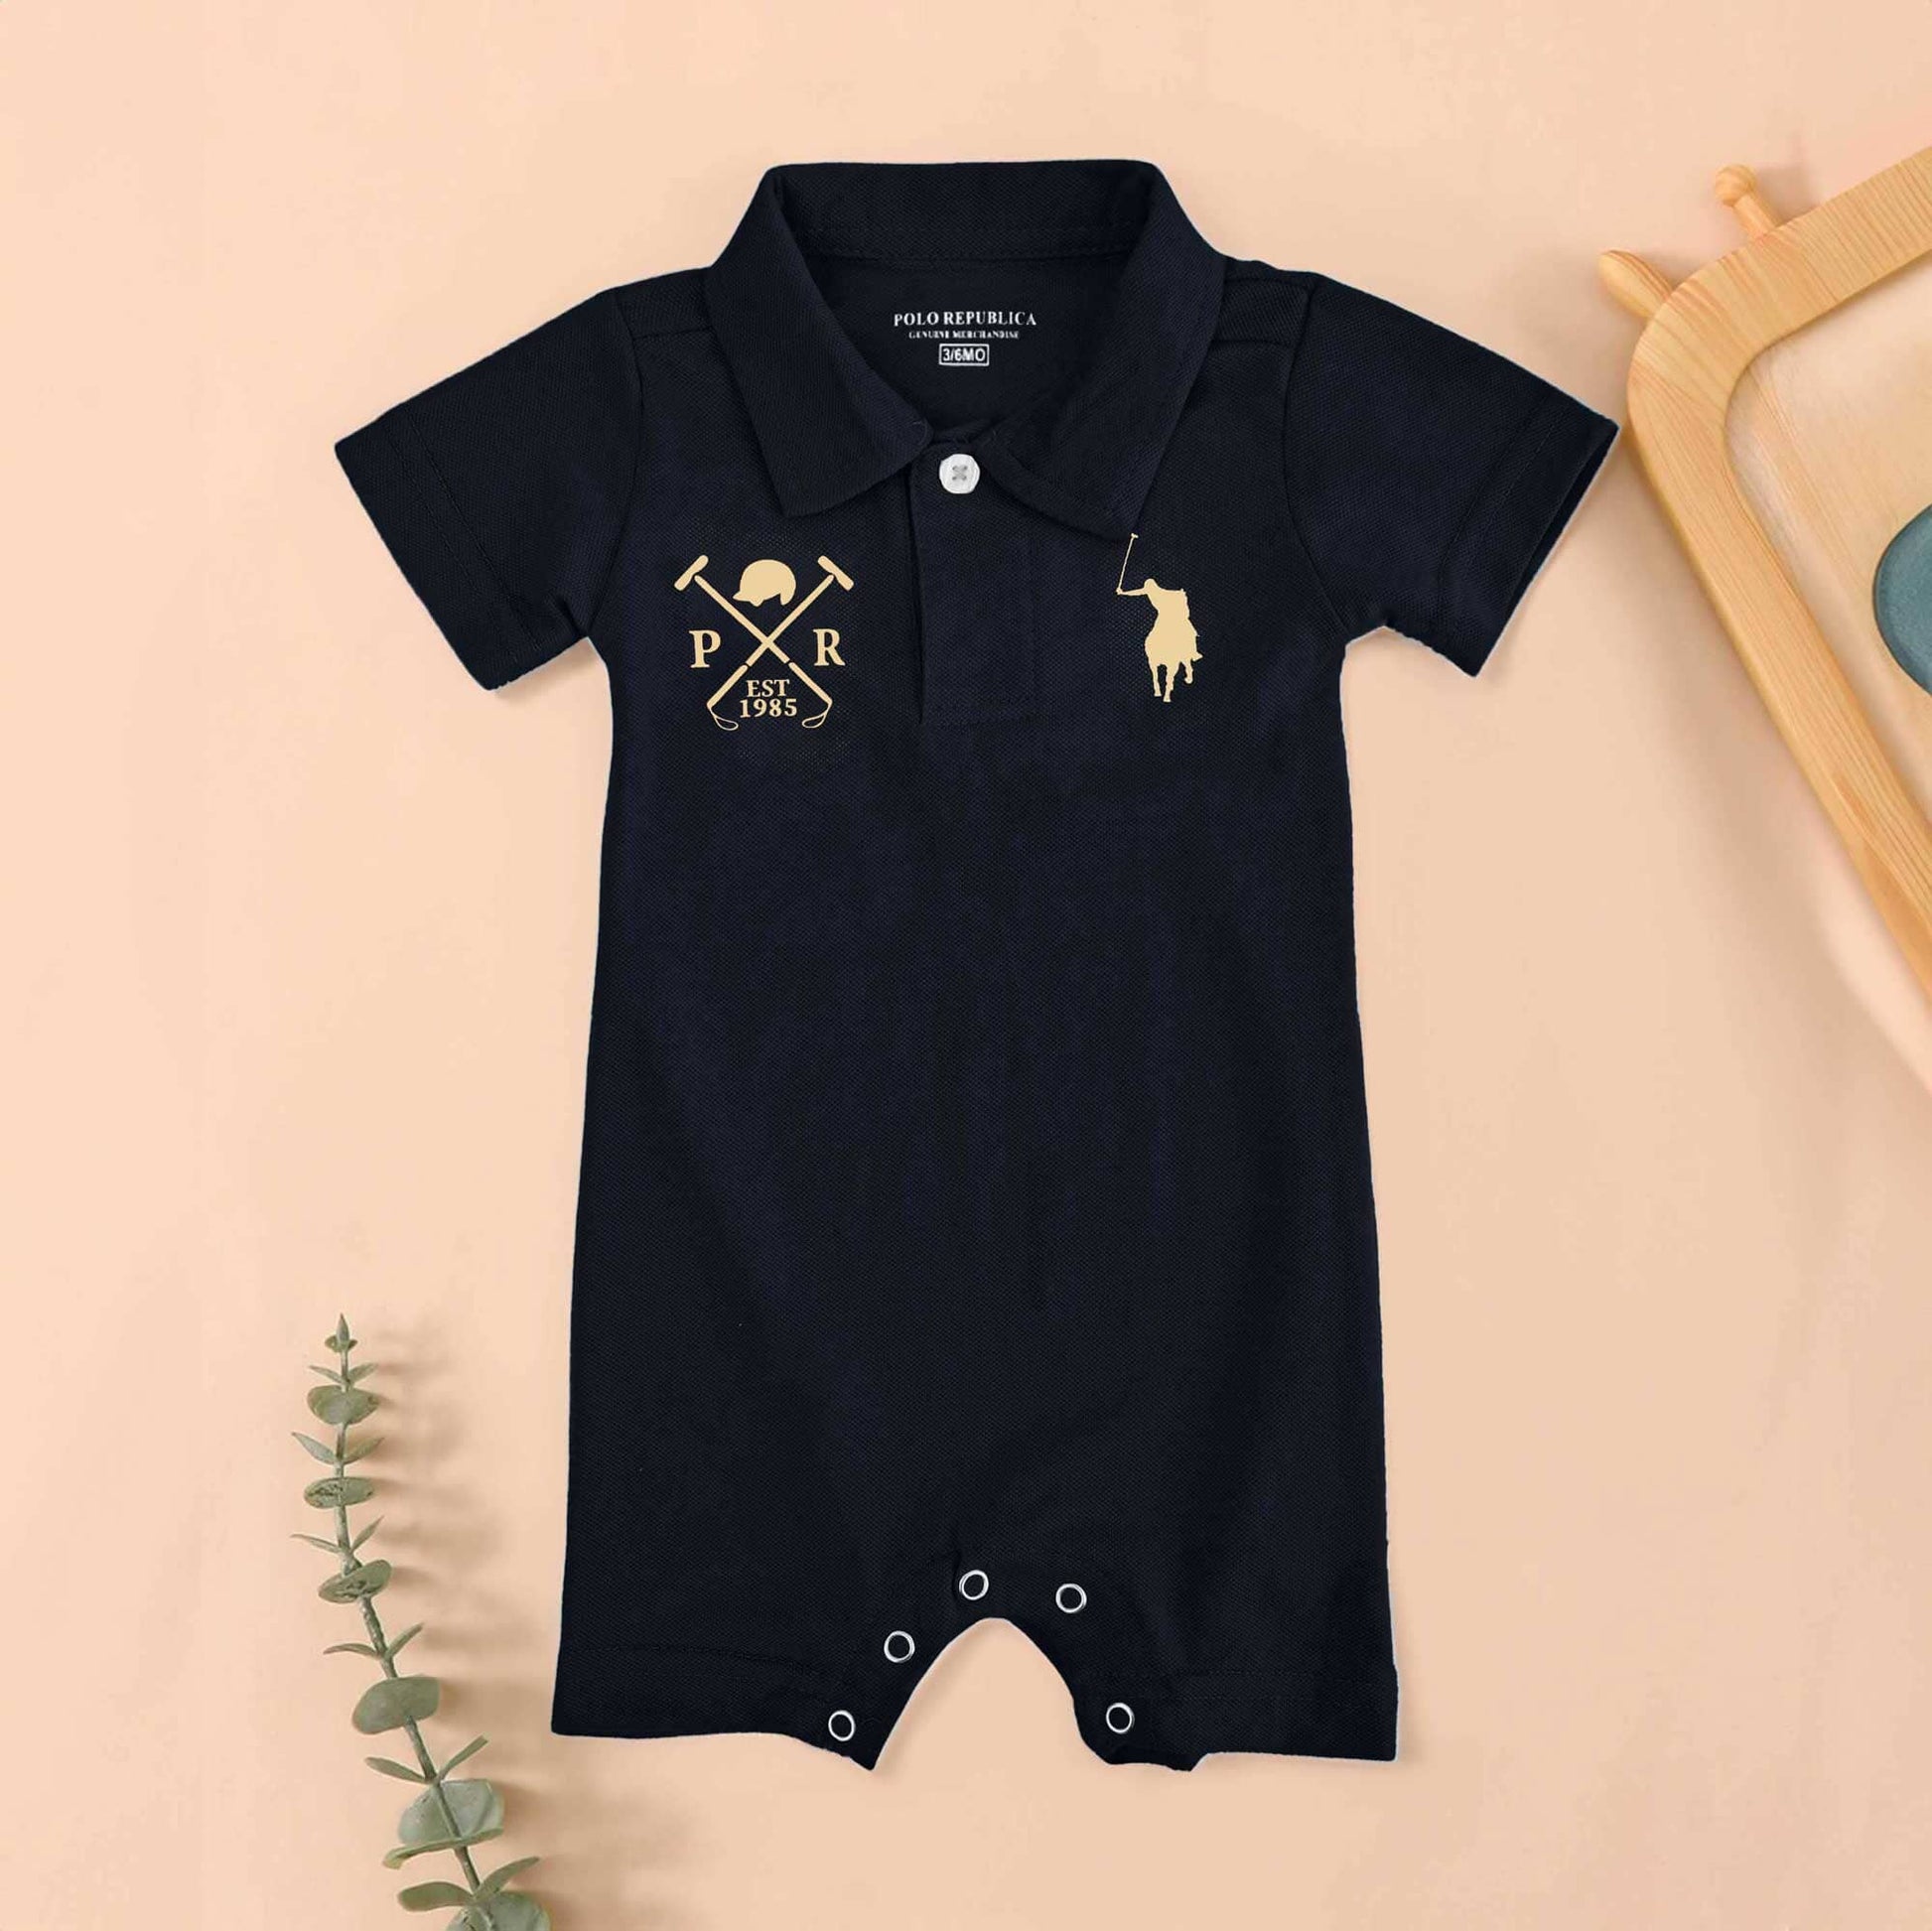 Polo Republica Signature Pony PR Mallets Printed Short Sleeve Baby Romper Romper Polo Republica Navy & Skin 0-3 Months 